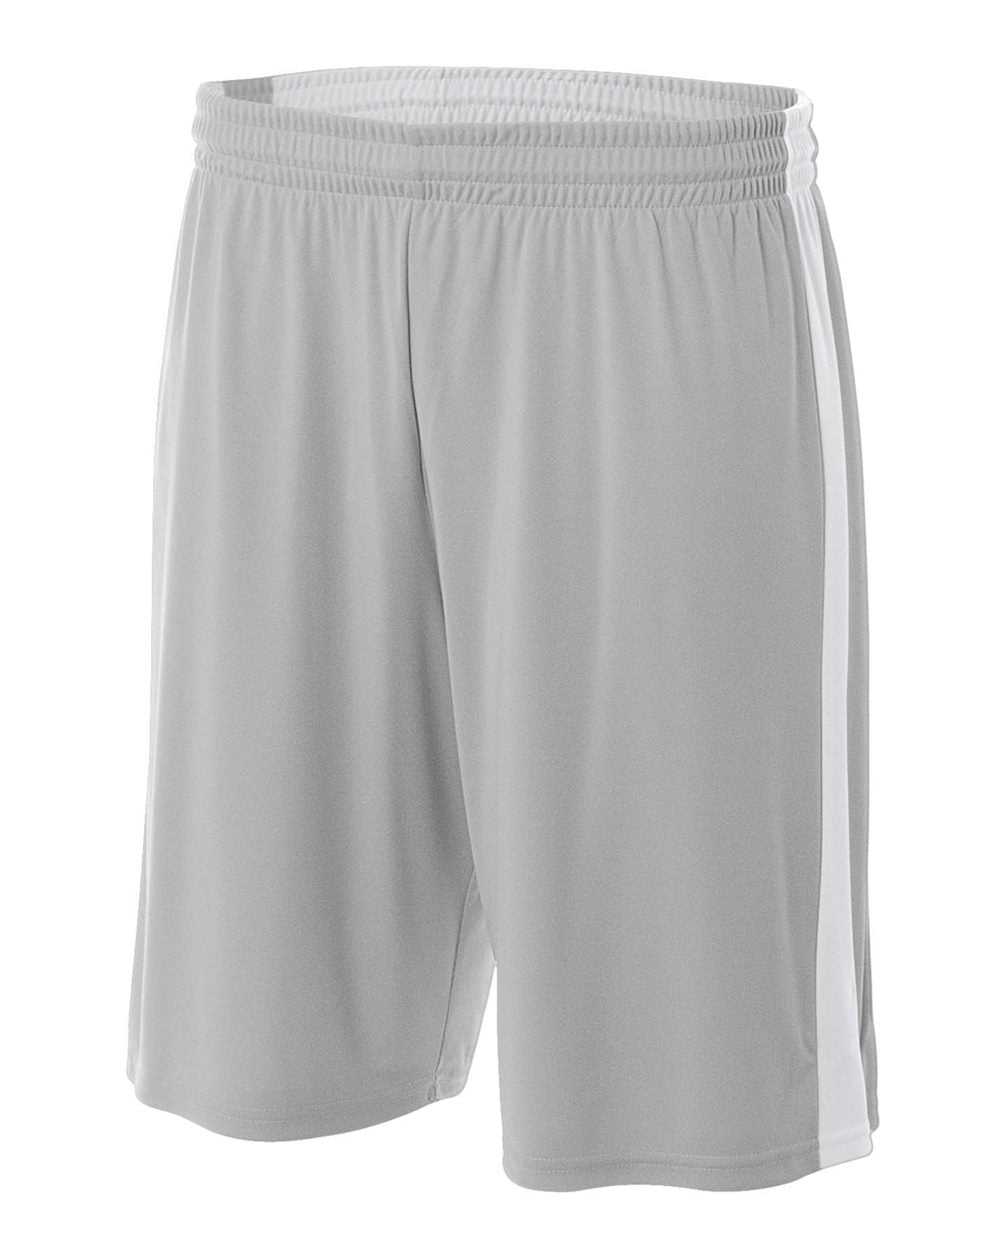 A4 NB5284 Youth Reversible Moisture Management 8" Short - Silver White - HIT a Double